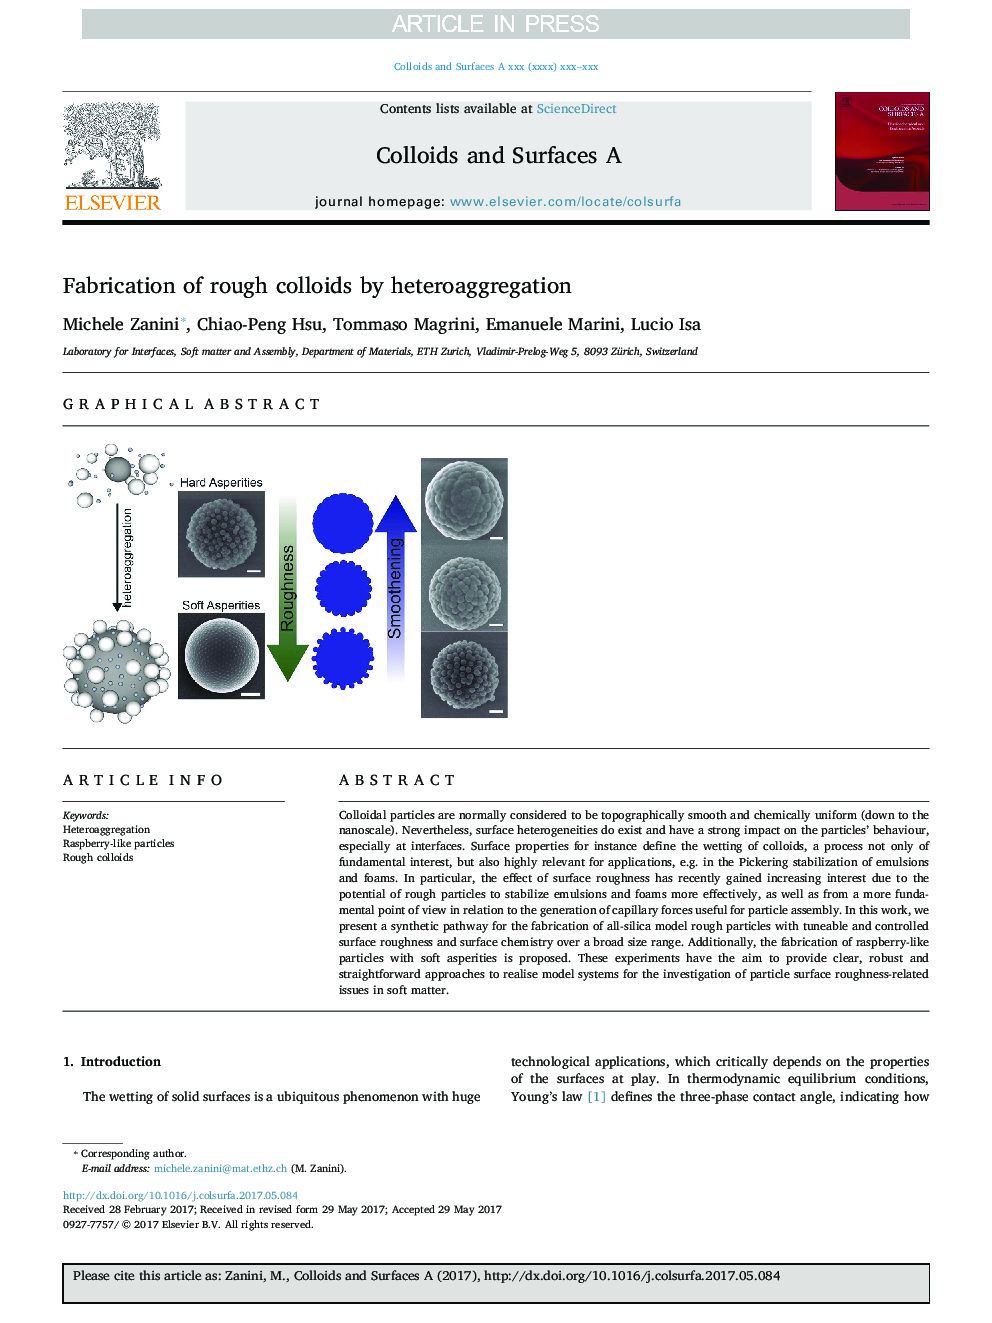 Fabrication of rough colloids by heteroaggregation